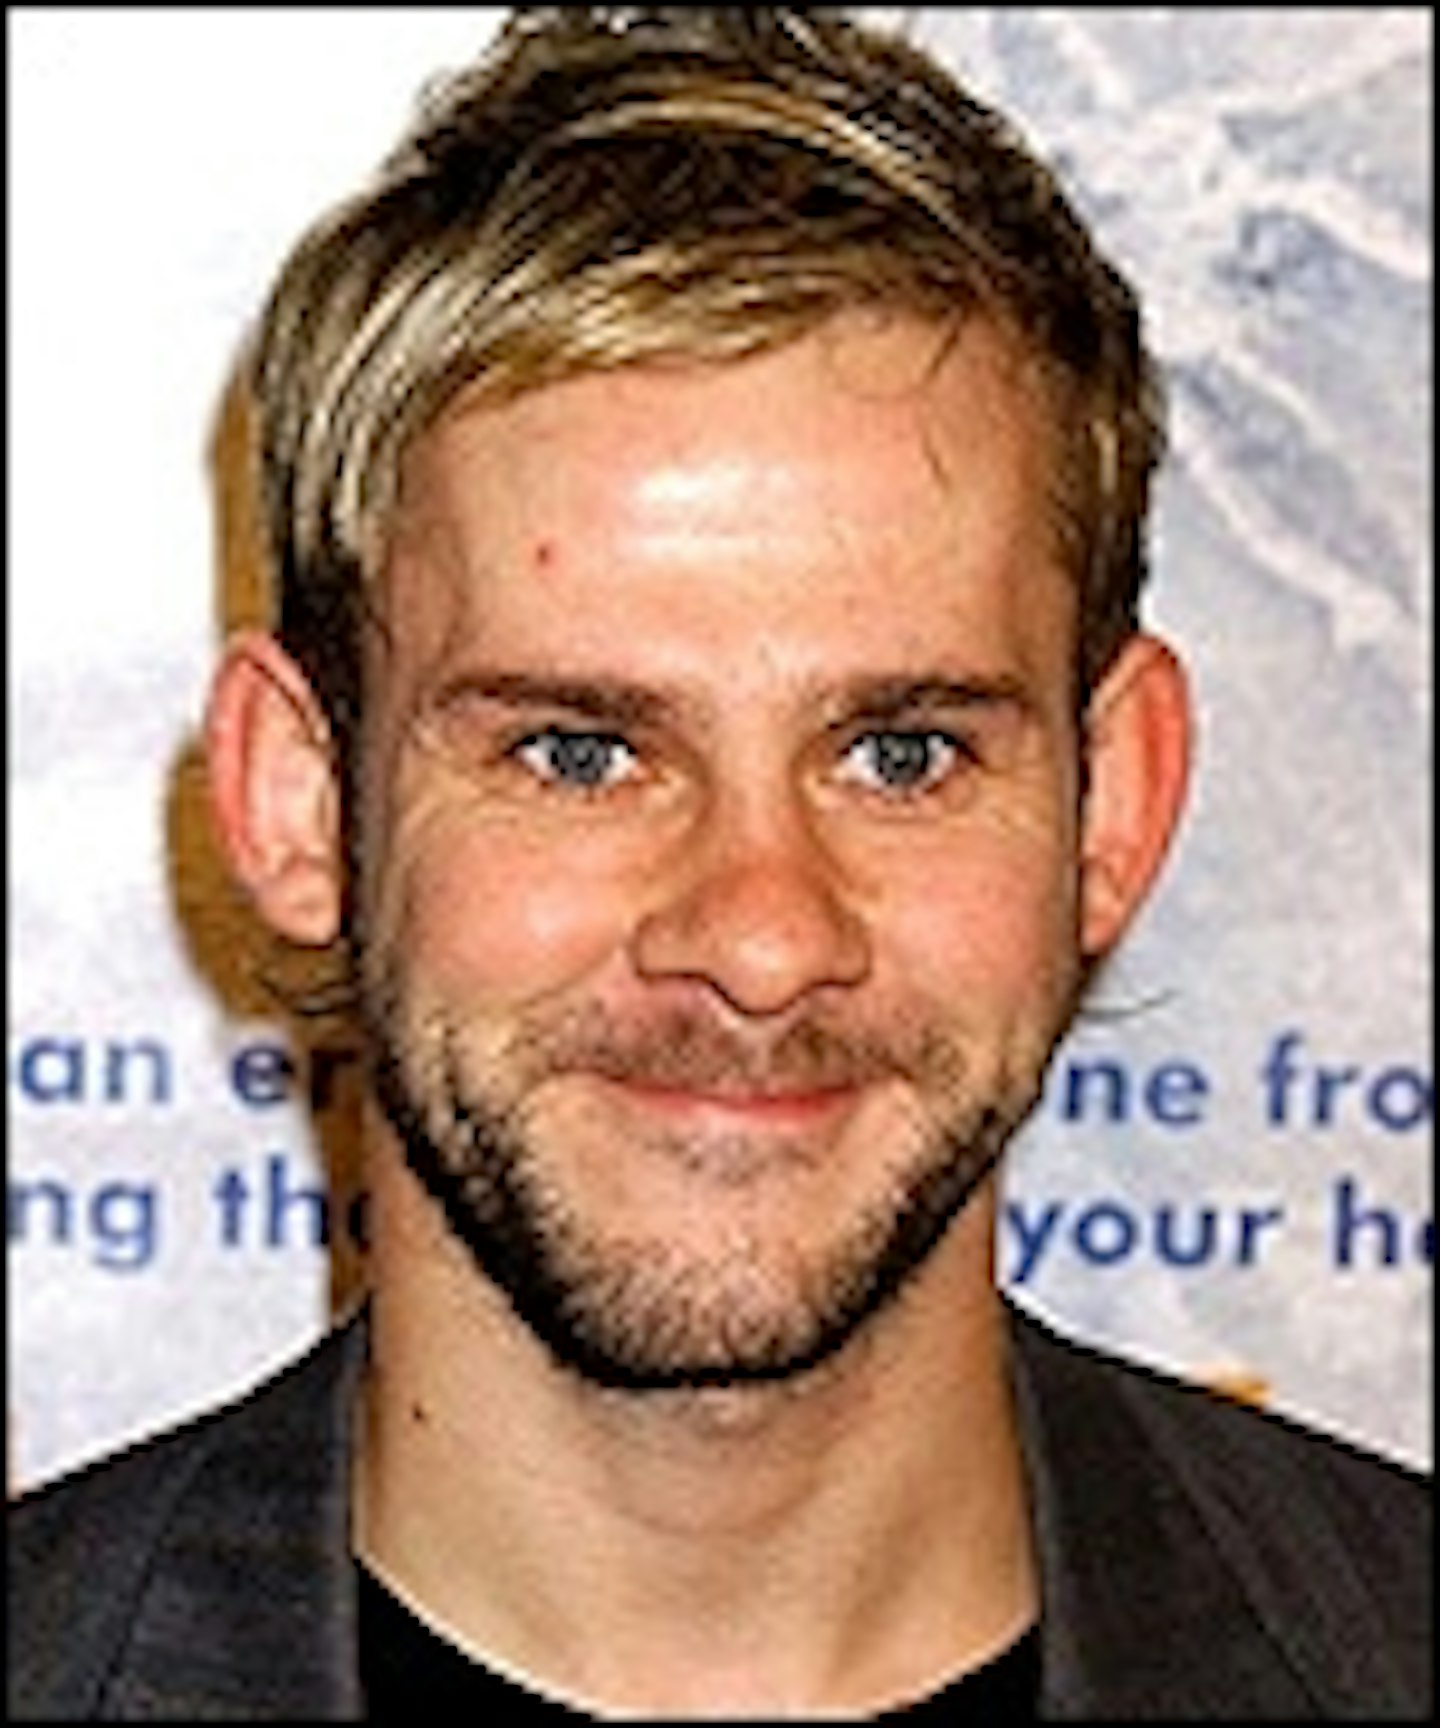 Dominic Monaghan Lands A Lead!